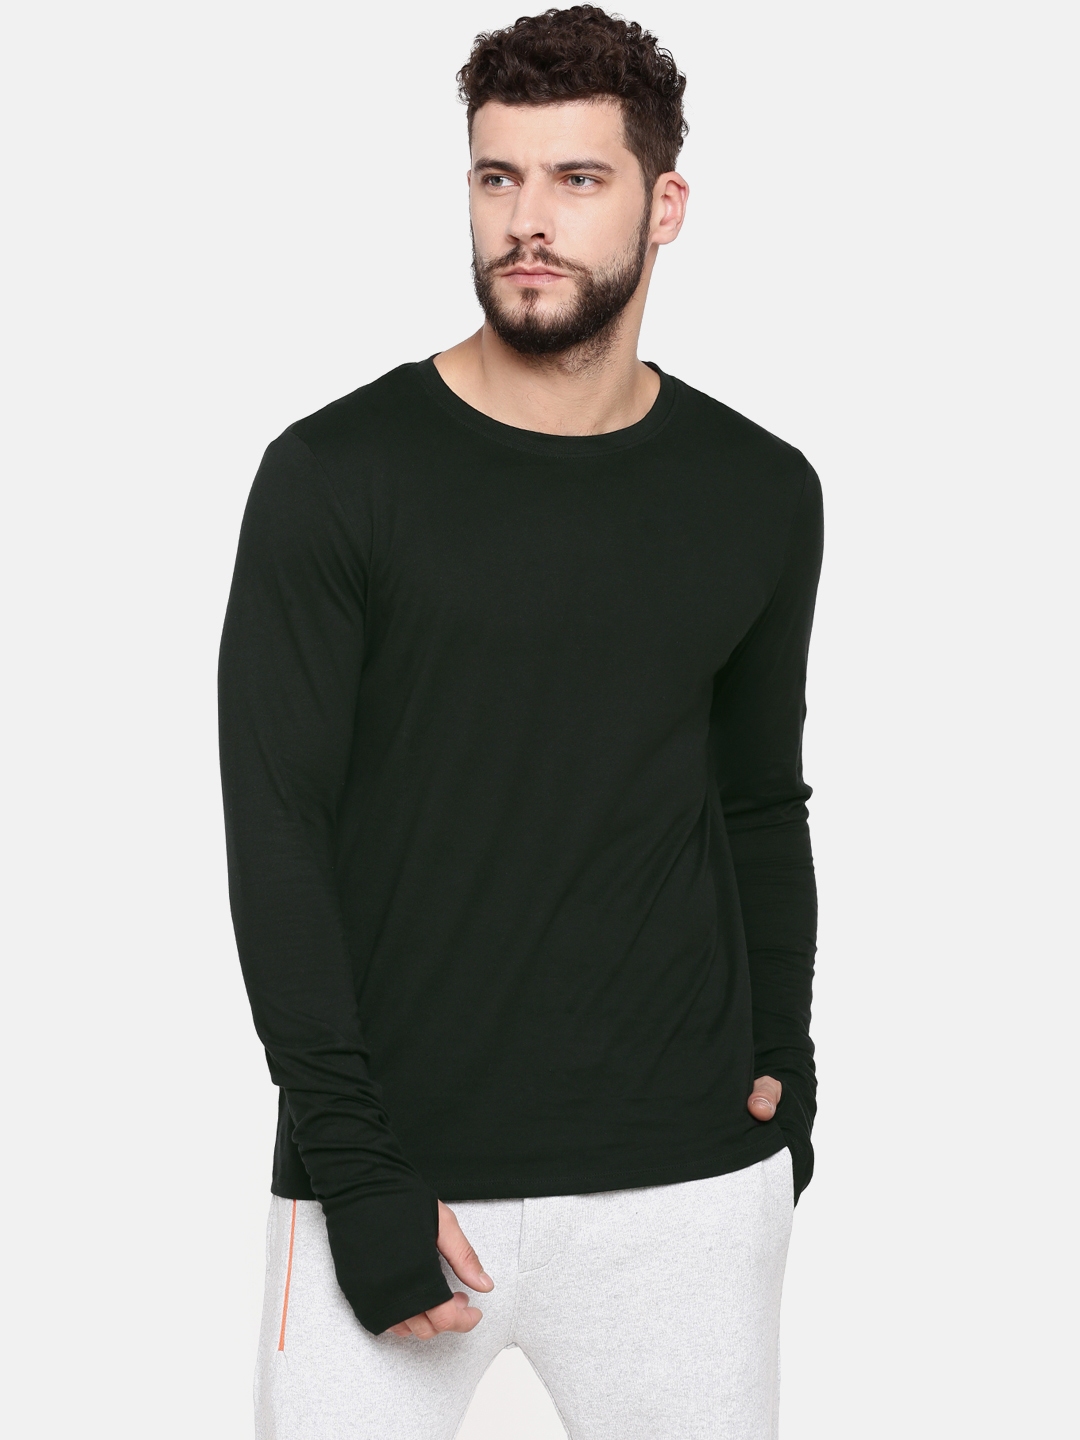 Buy SKULT By Shahid Kapoor Men Black Solid Round Neck Pure Cotton T ...